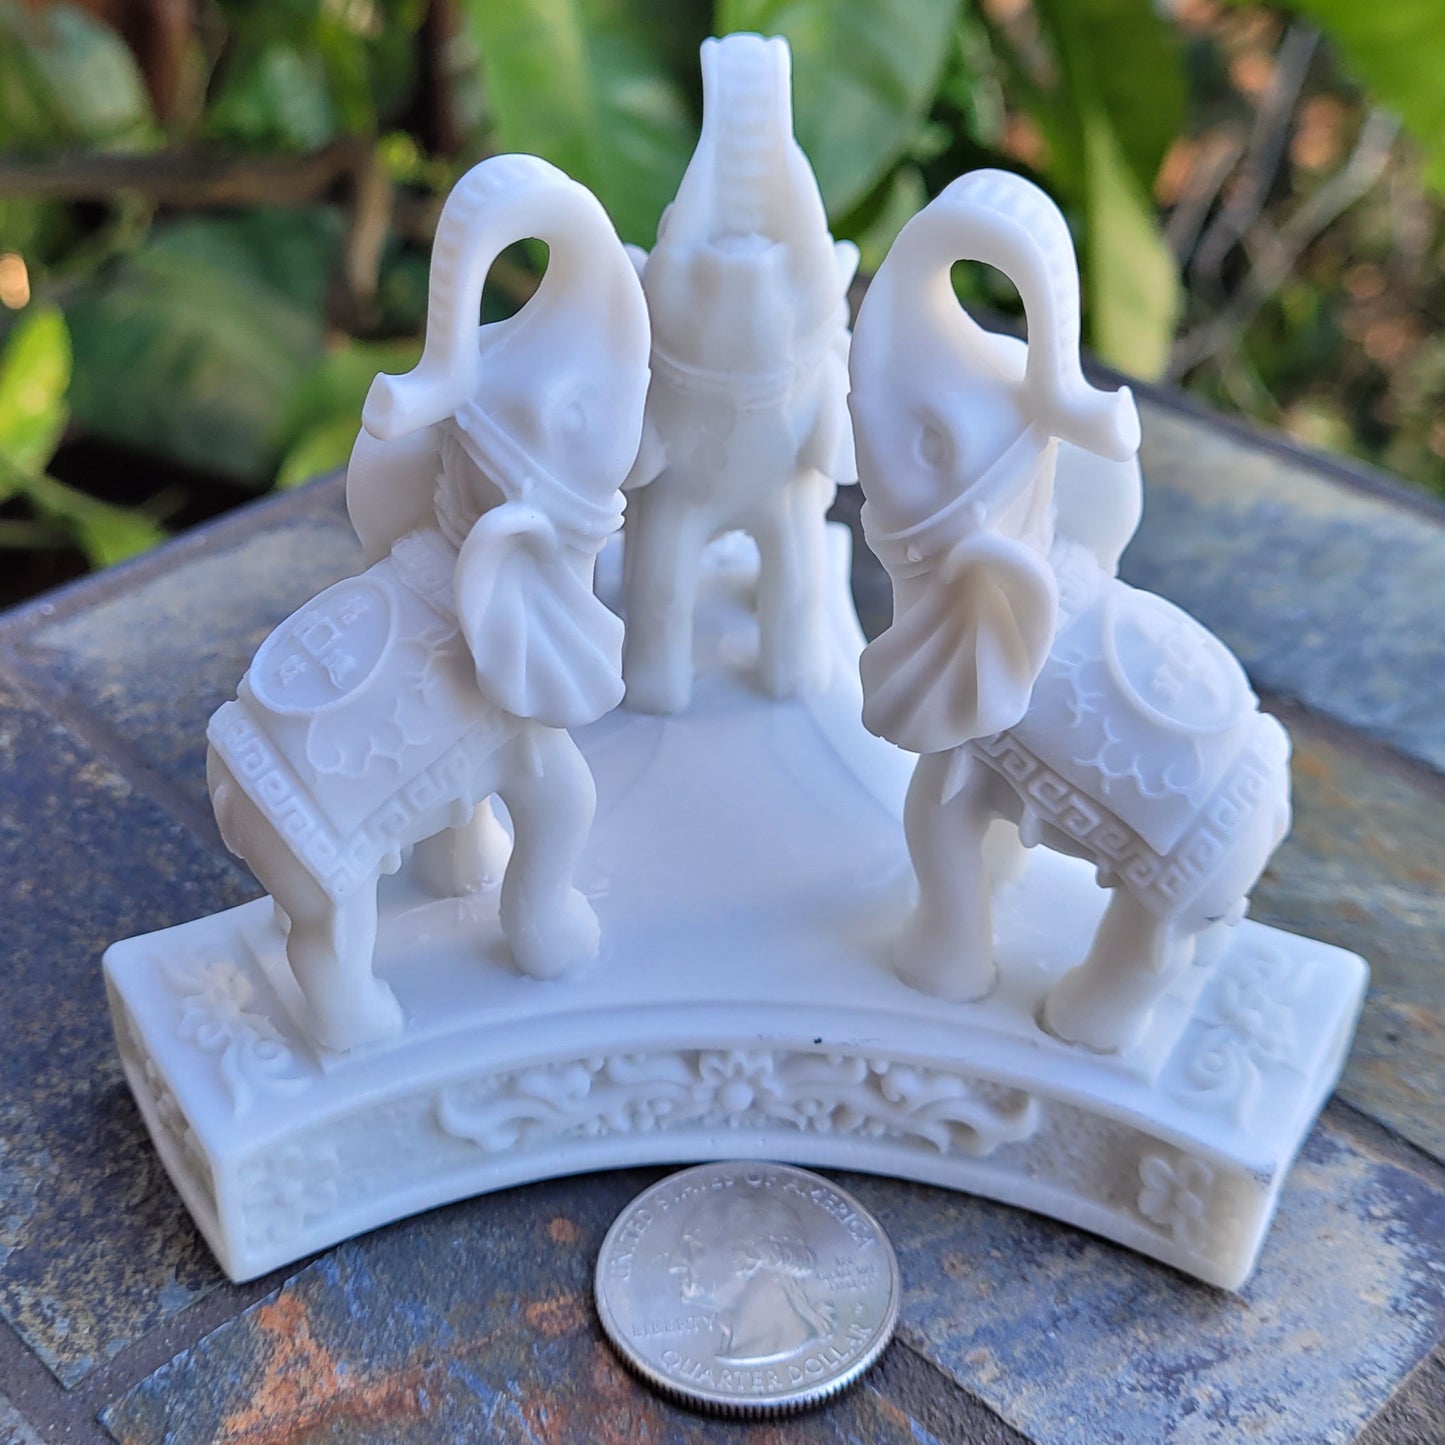 Elephant Sphere Holder Display Stand for Crystal Balls or Eggs 2" to 5" (51mm to 126mm)